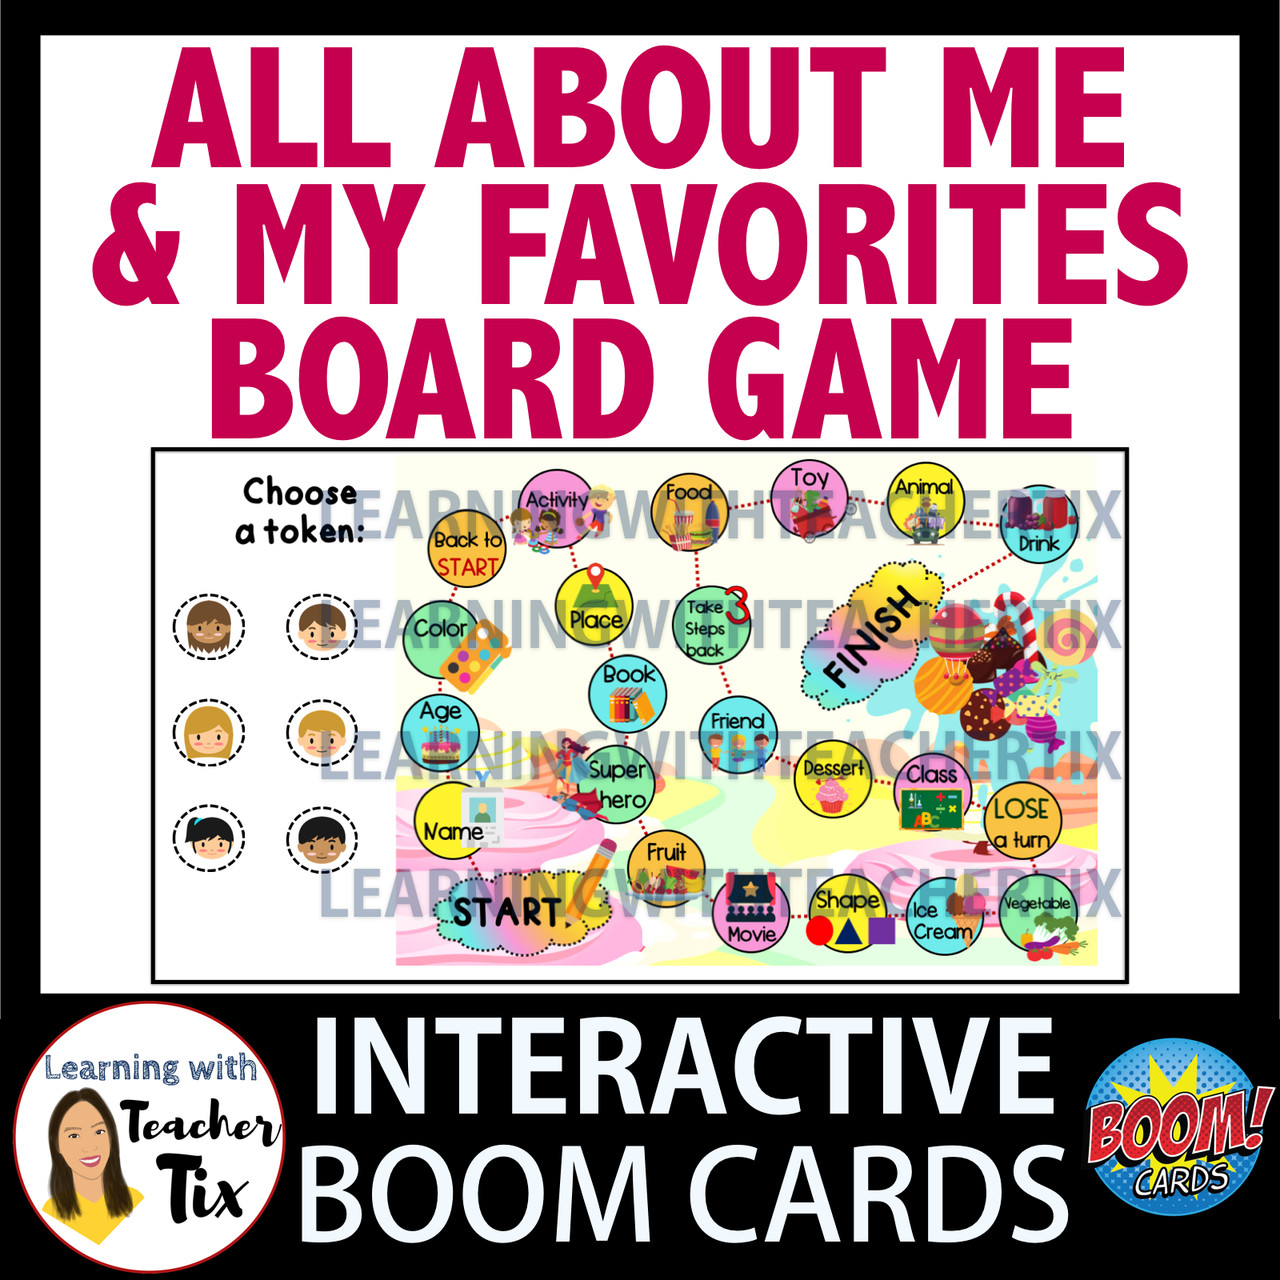 All About Me and My Favorites Board Game Boom Cards